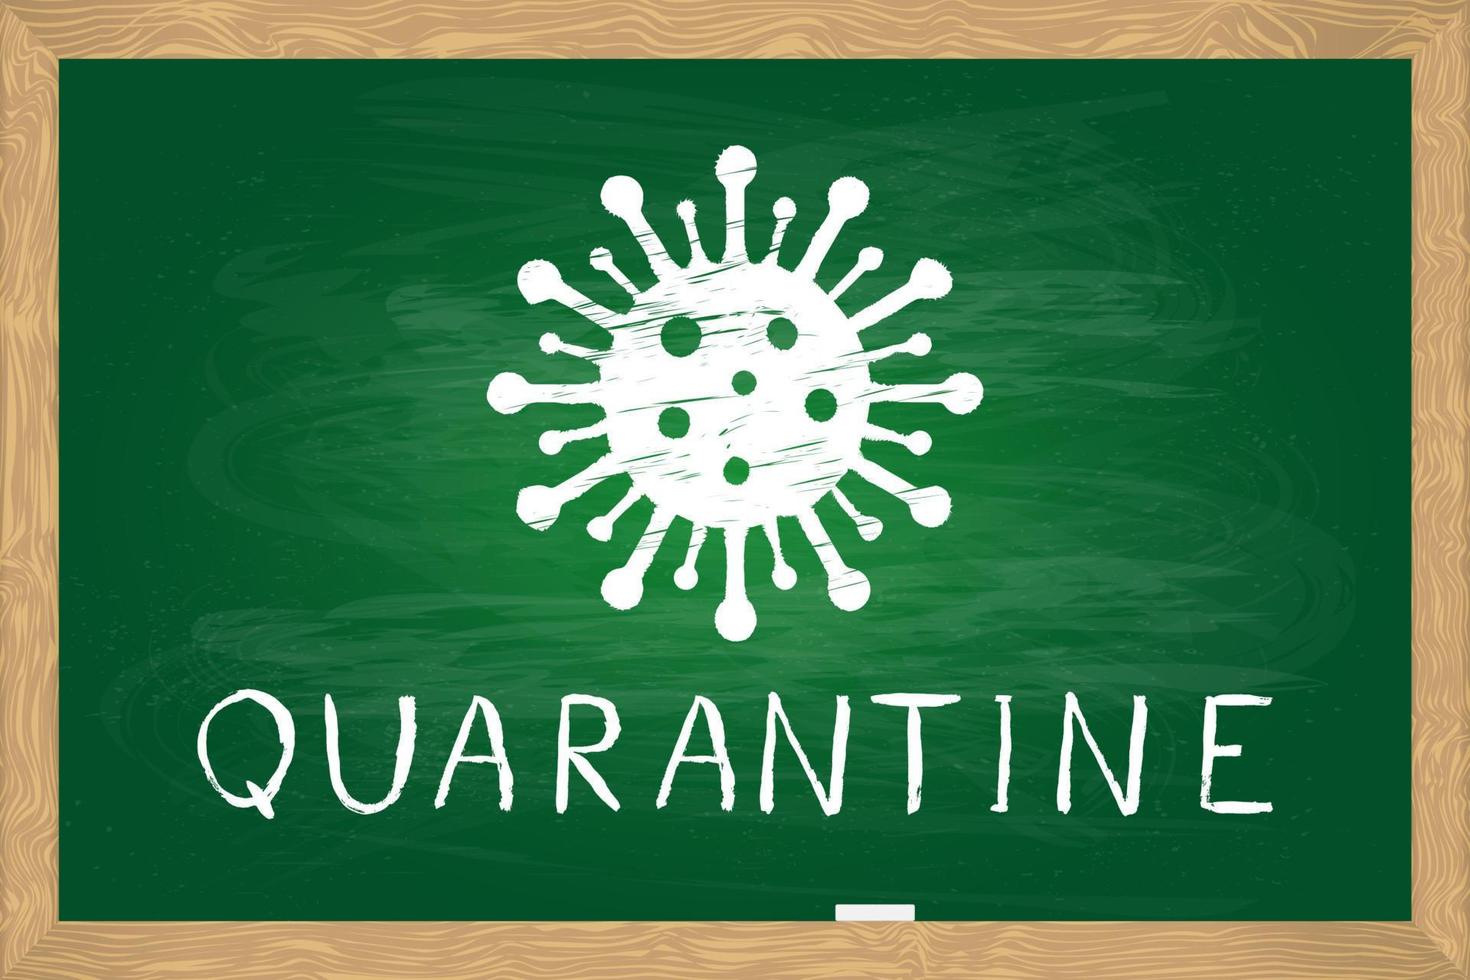 Quarantine hand written on green chalkboard with wooden frame. Pandemic coronavirus COVID-19. Remote education concept. Easy to edit vector template for typography poster, banner, flyer, sticker, etc.